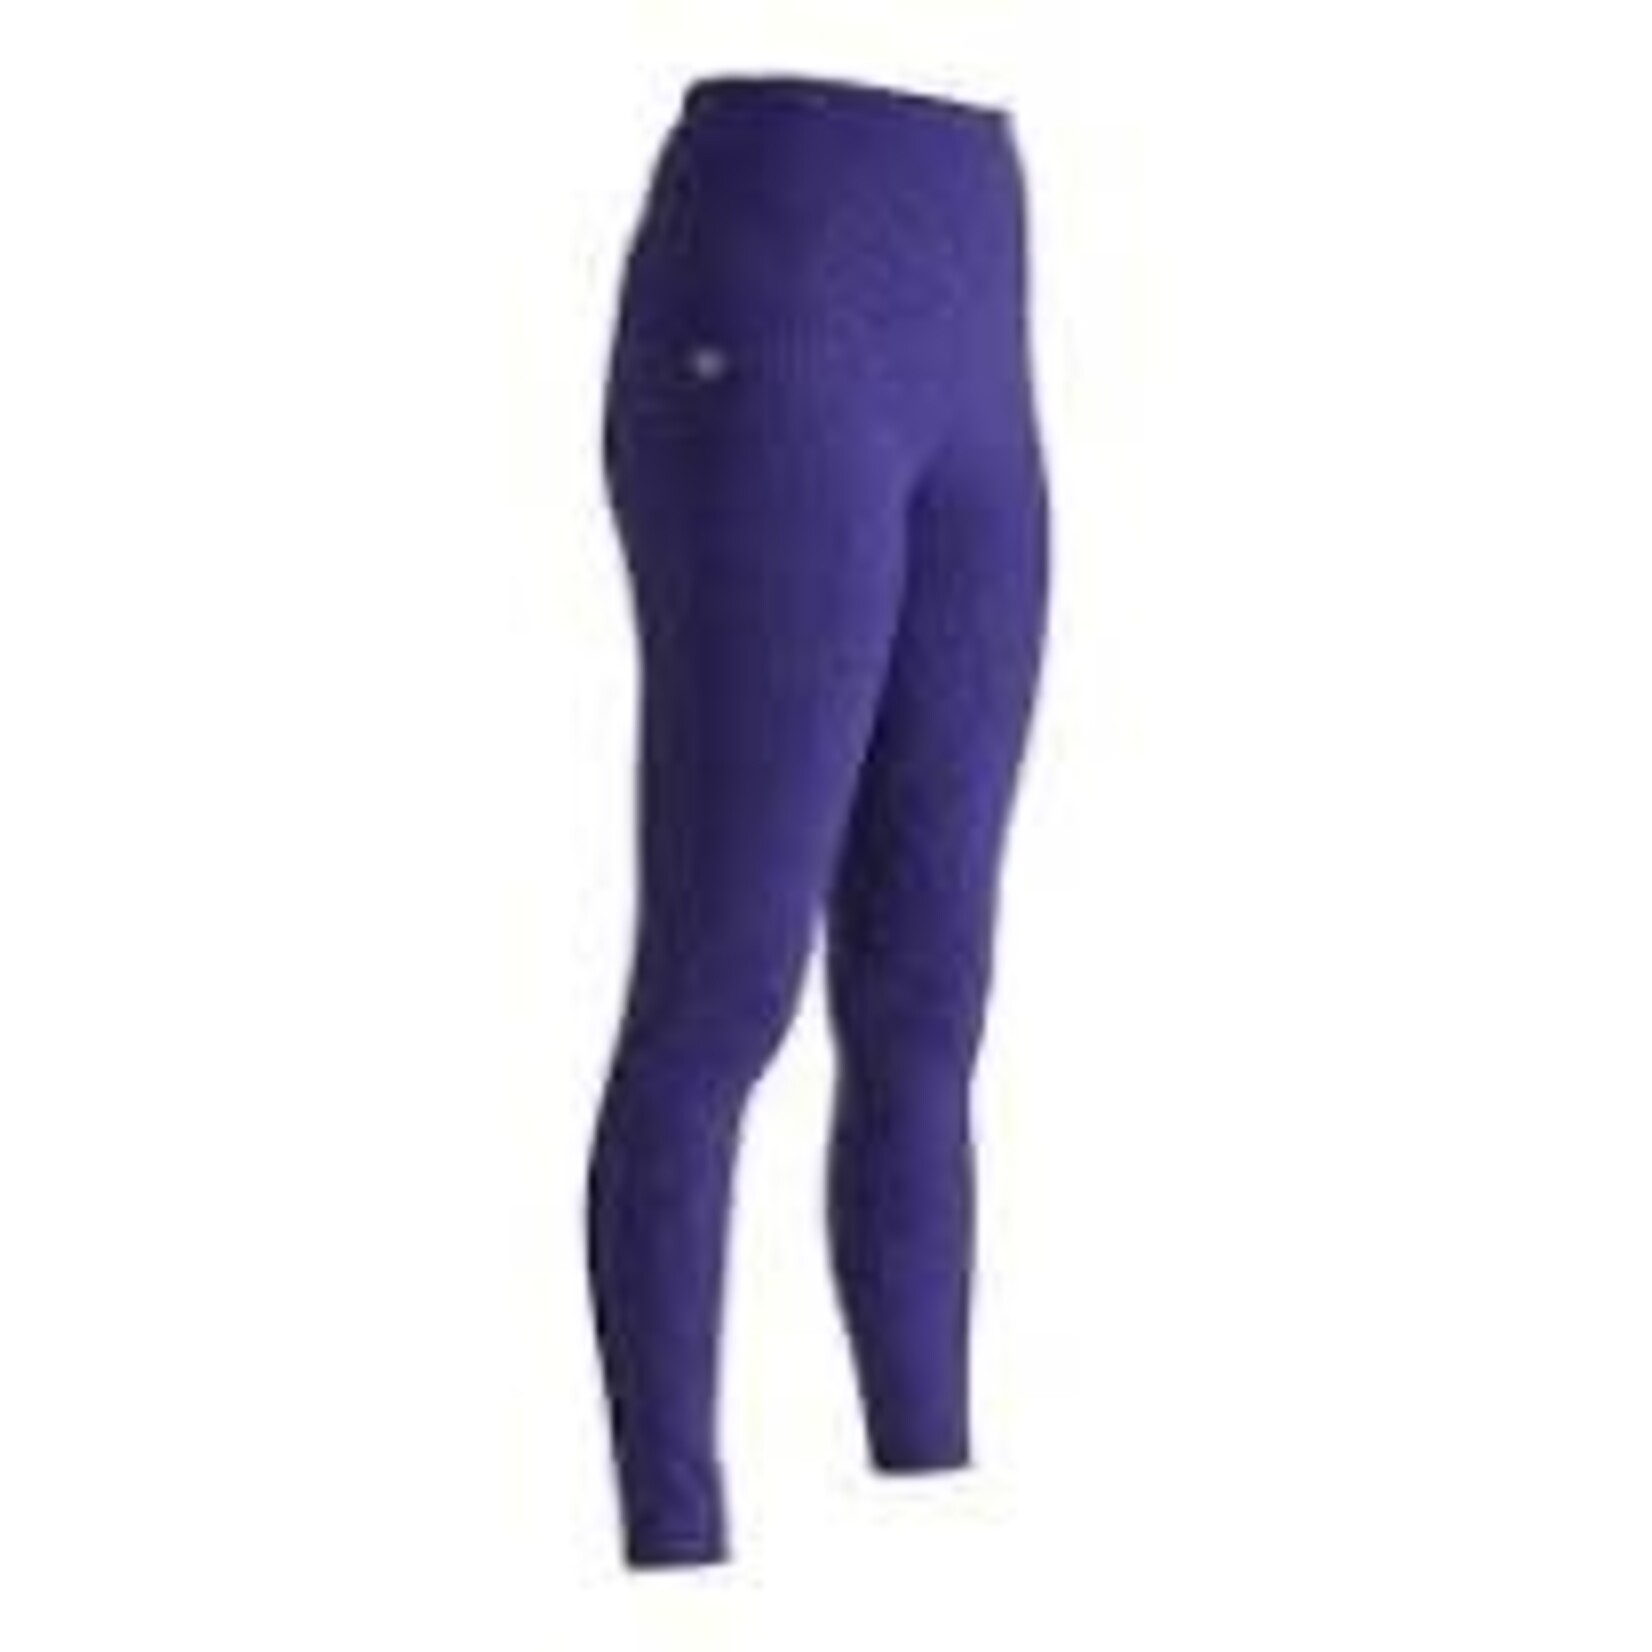 Aubrion Non-Stop Riding Tights